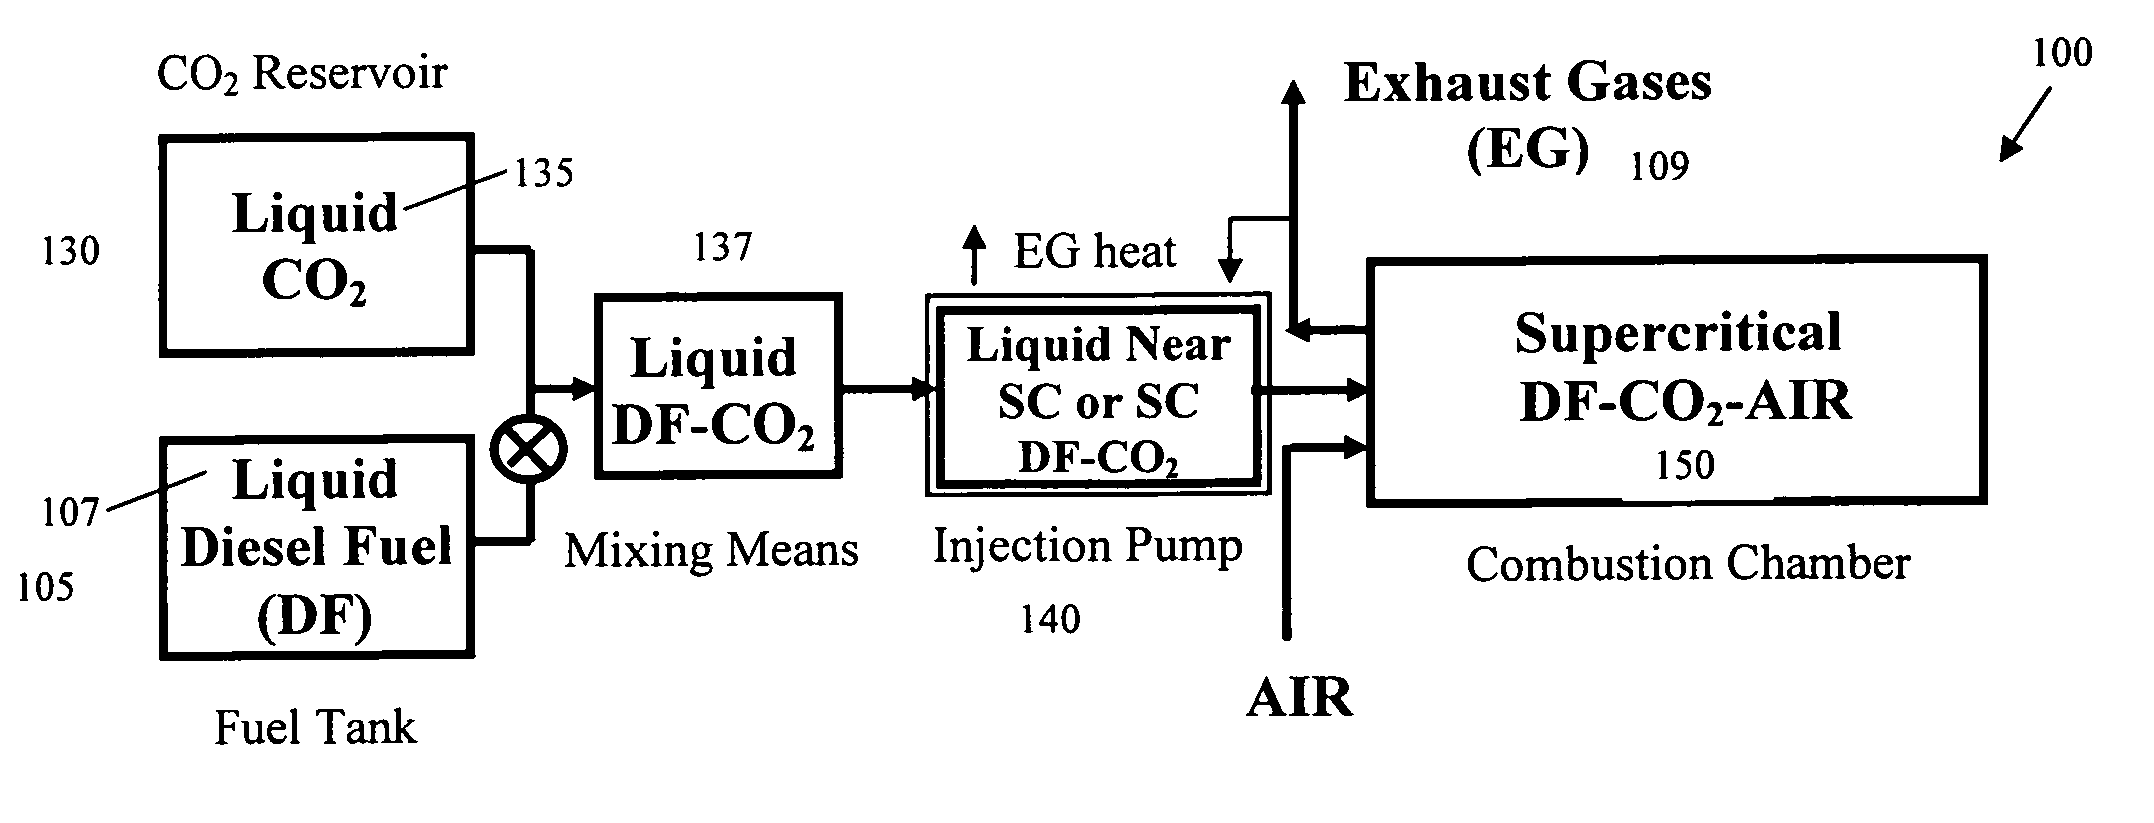 Supercritical diesel fuel composition, combustion process and fuel system